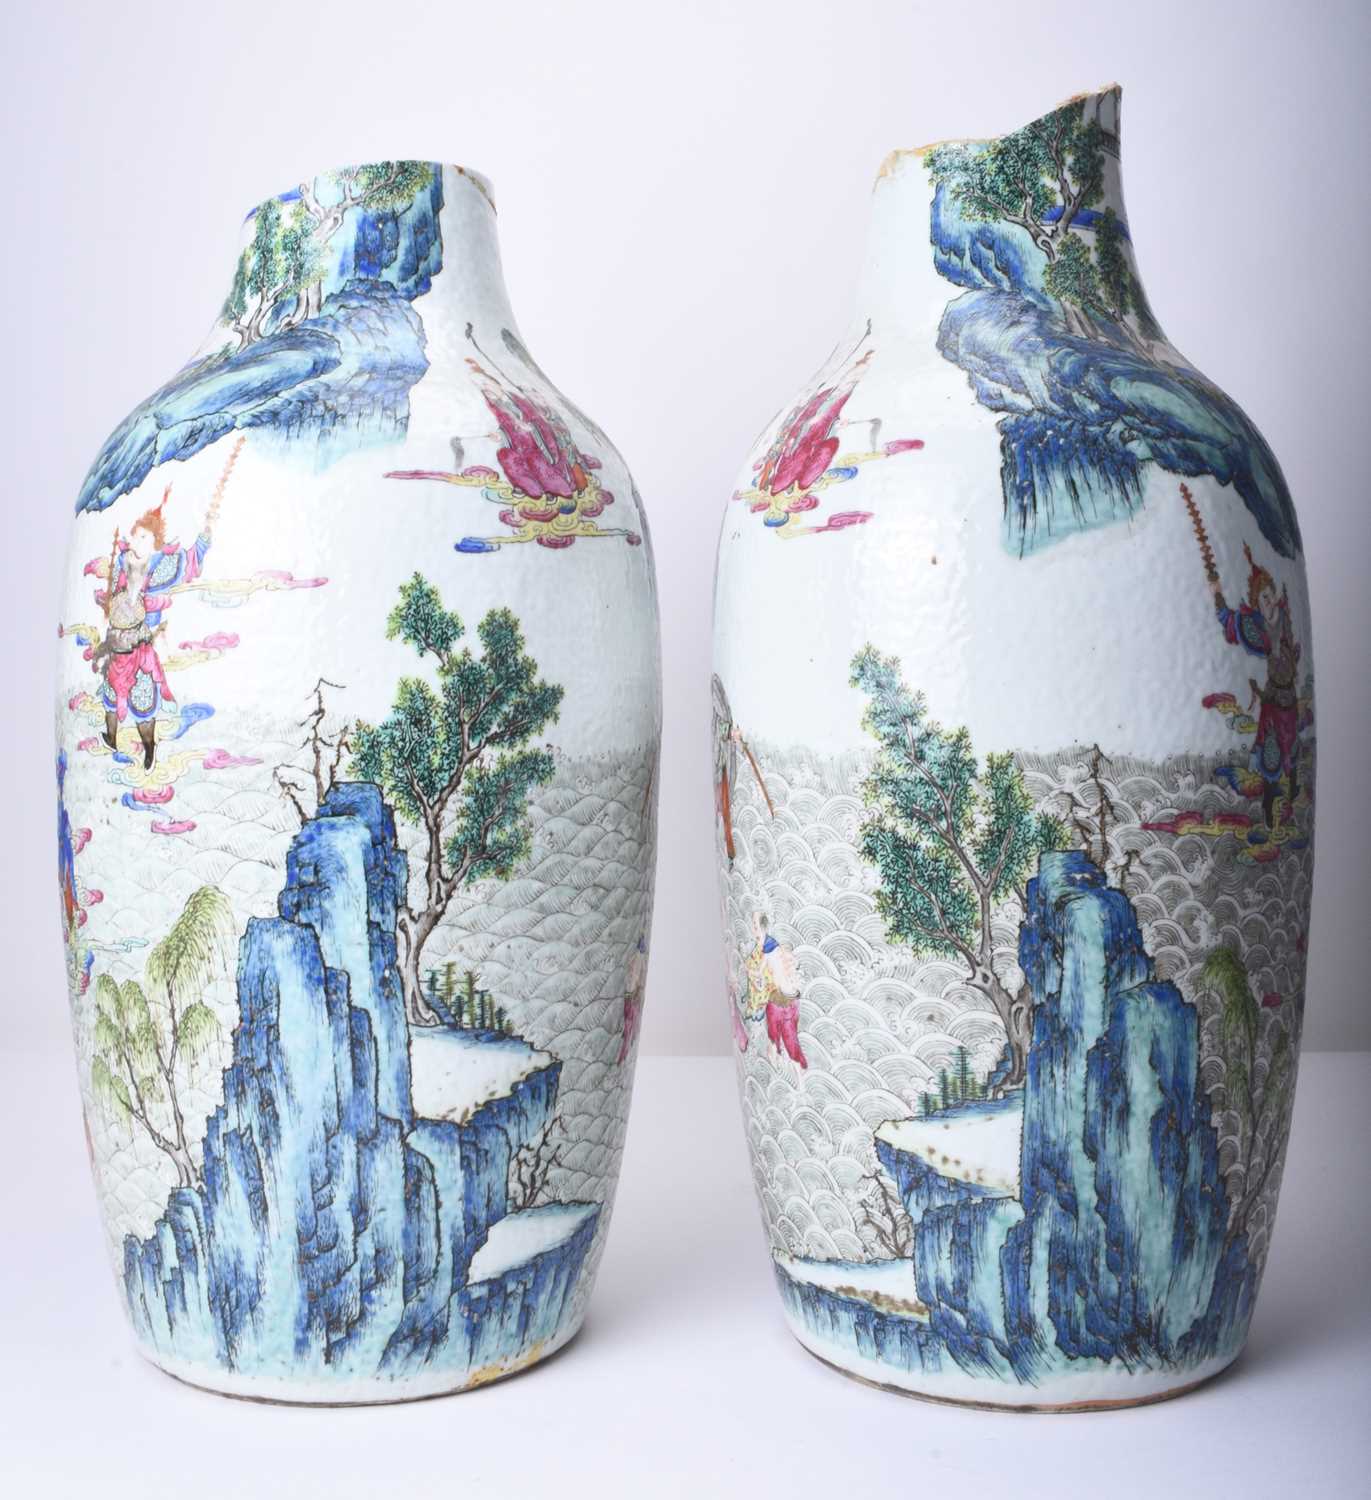 This pair of 19th century Chinese famille rose vases that sold for £3,200.